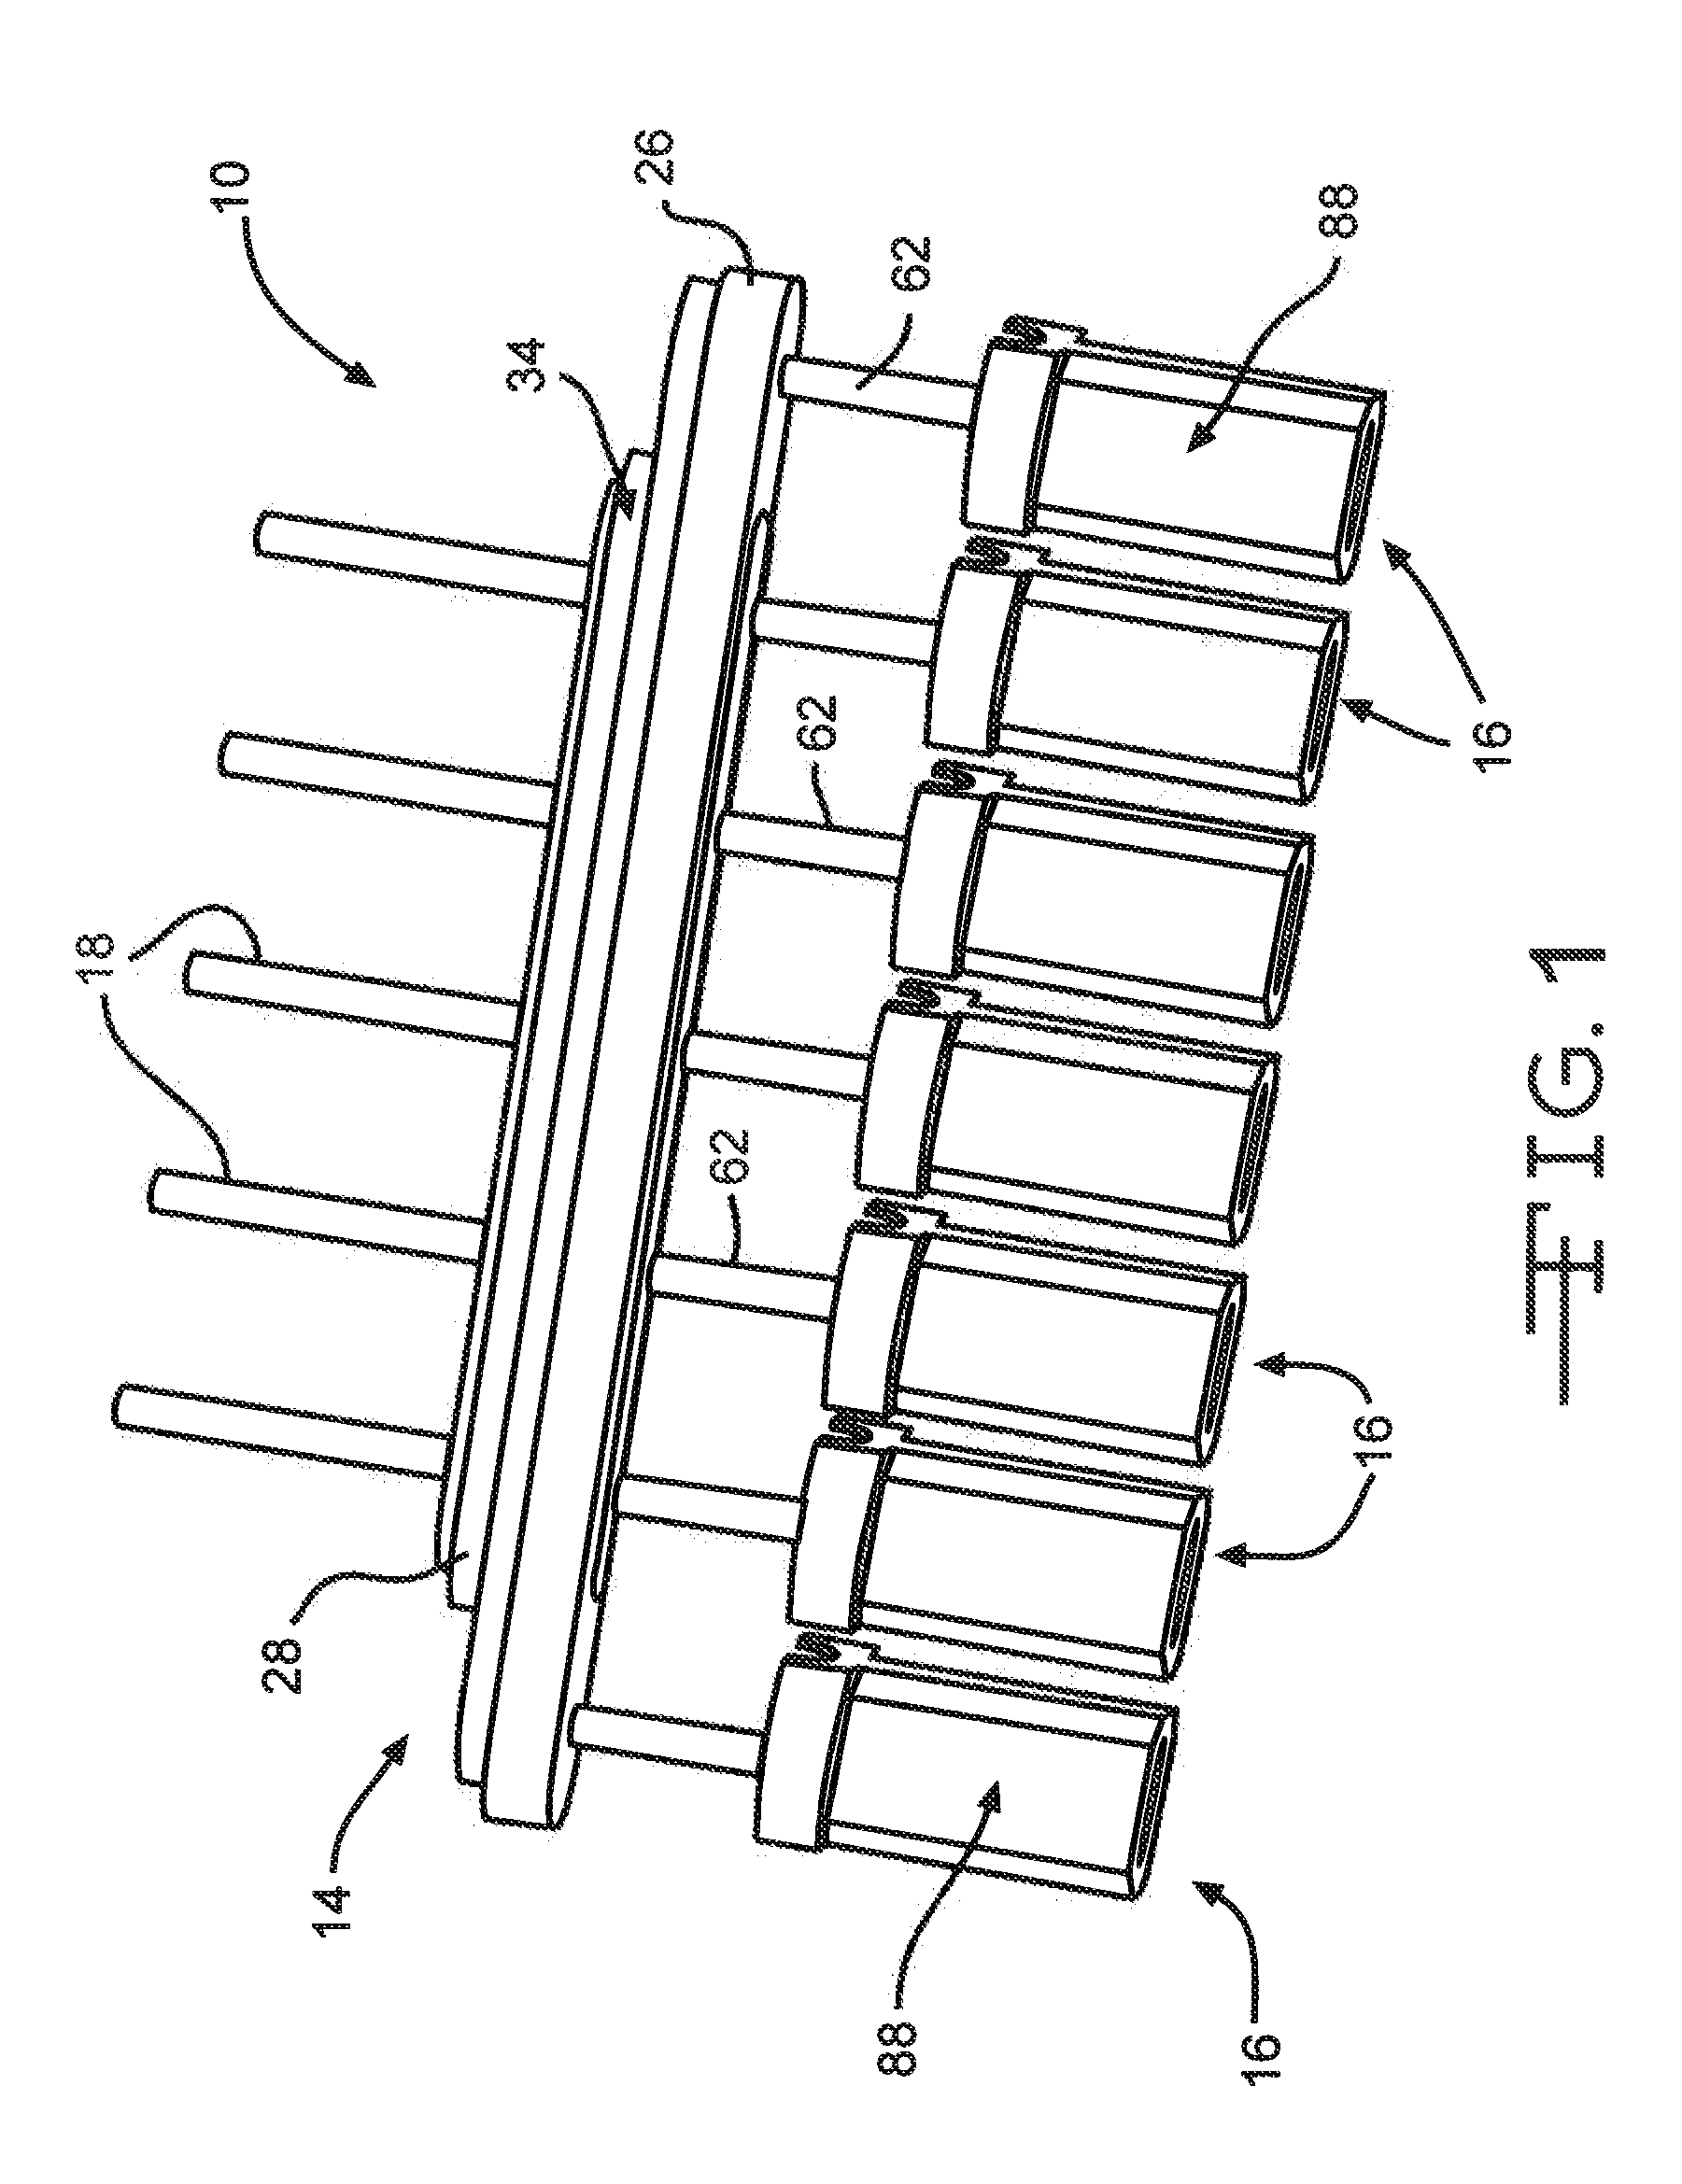 Feedthrough Wire Connector for Use in a Medical Device